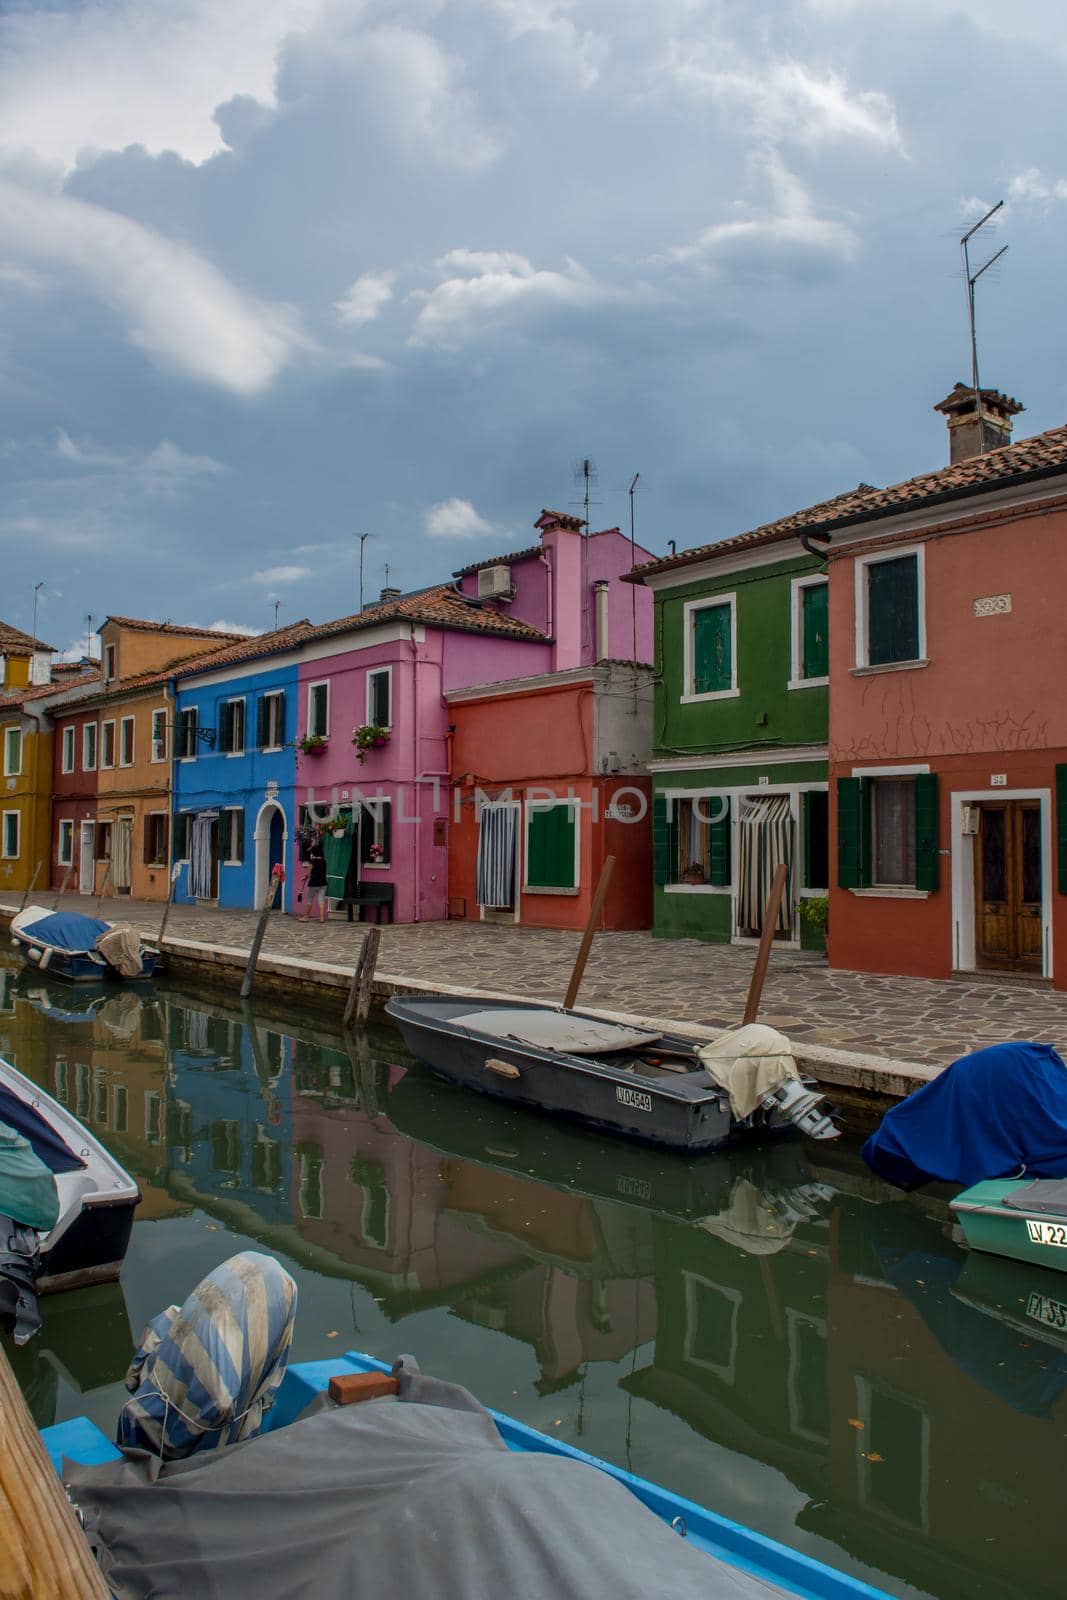 discovery of the city of Venice, Burano and its small canals and romantic alleys, Italy